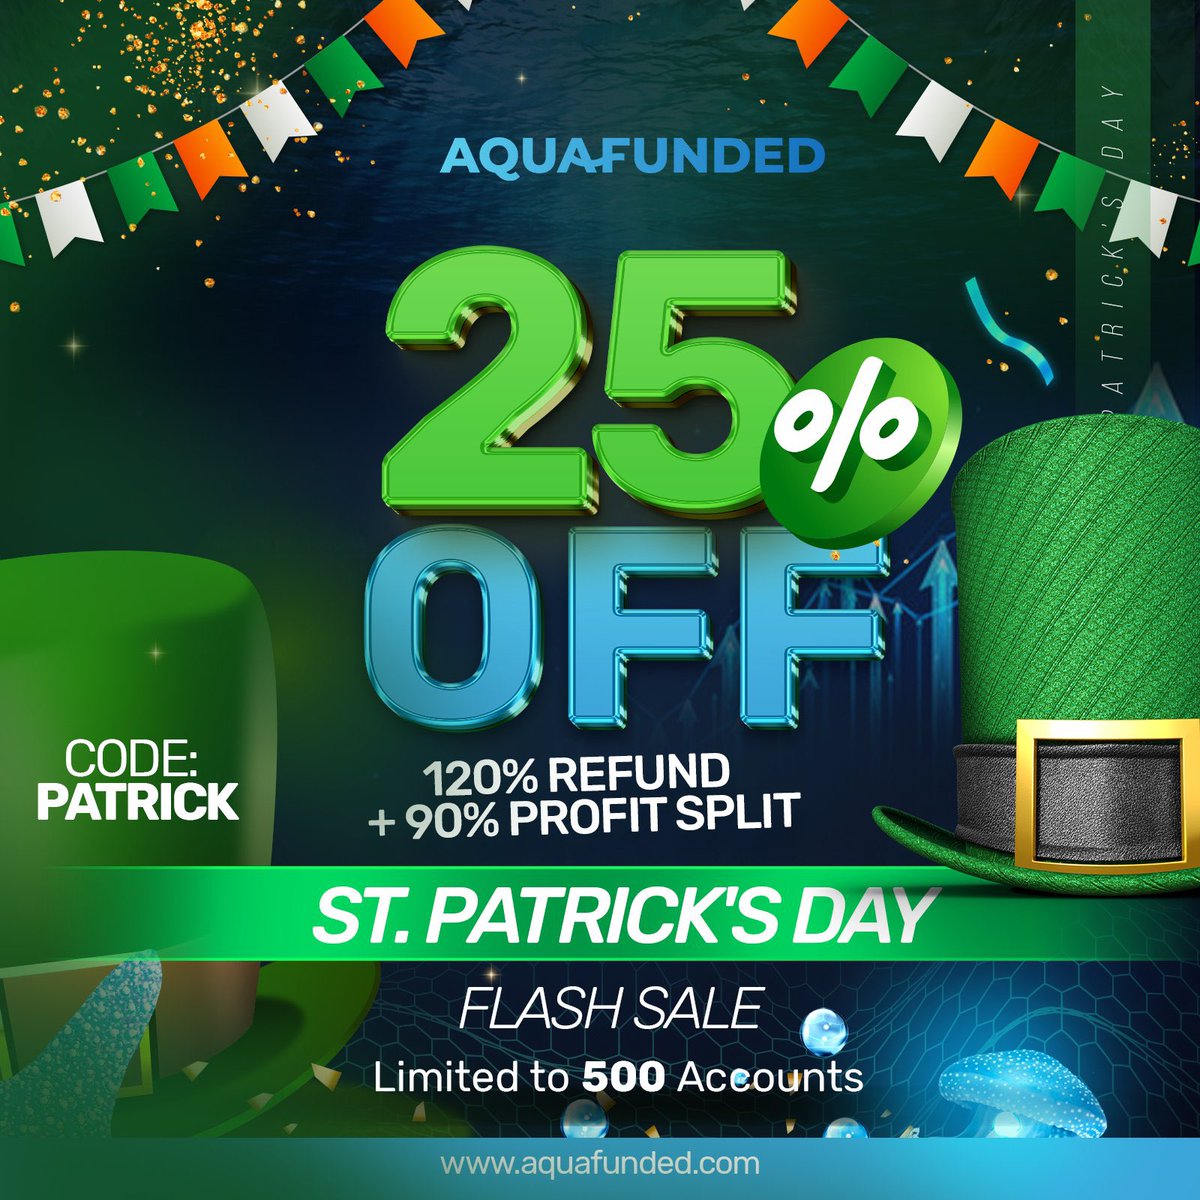 🍀St Patrick’s Day🍀 ⚡Flash Sale⚡ 🌊40% off $10k challenges 🌊25% OFF All Accounts Only for 500 Accounts 👀🥵 🍀120% Refund 🍀90% Profit Split Limited Time Promo Get your account today dashboard.aquafunded.com/ref/1329/